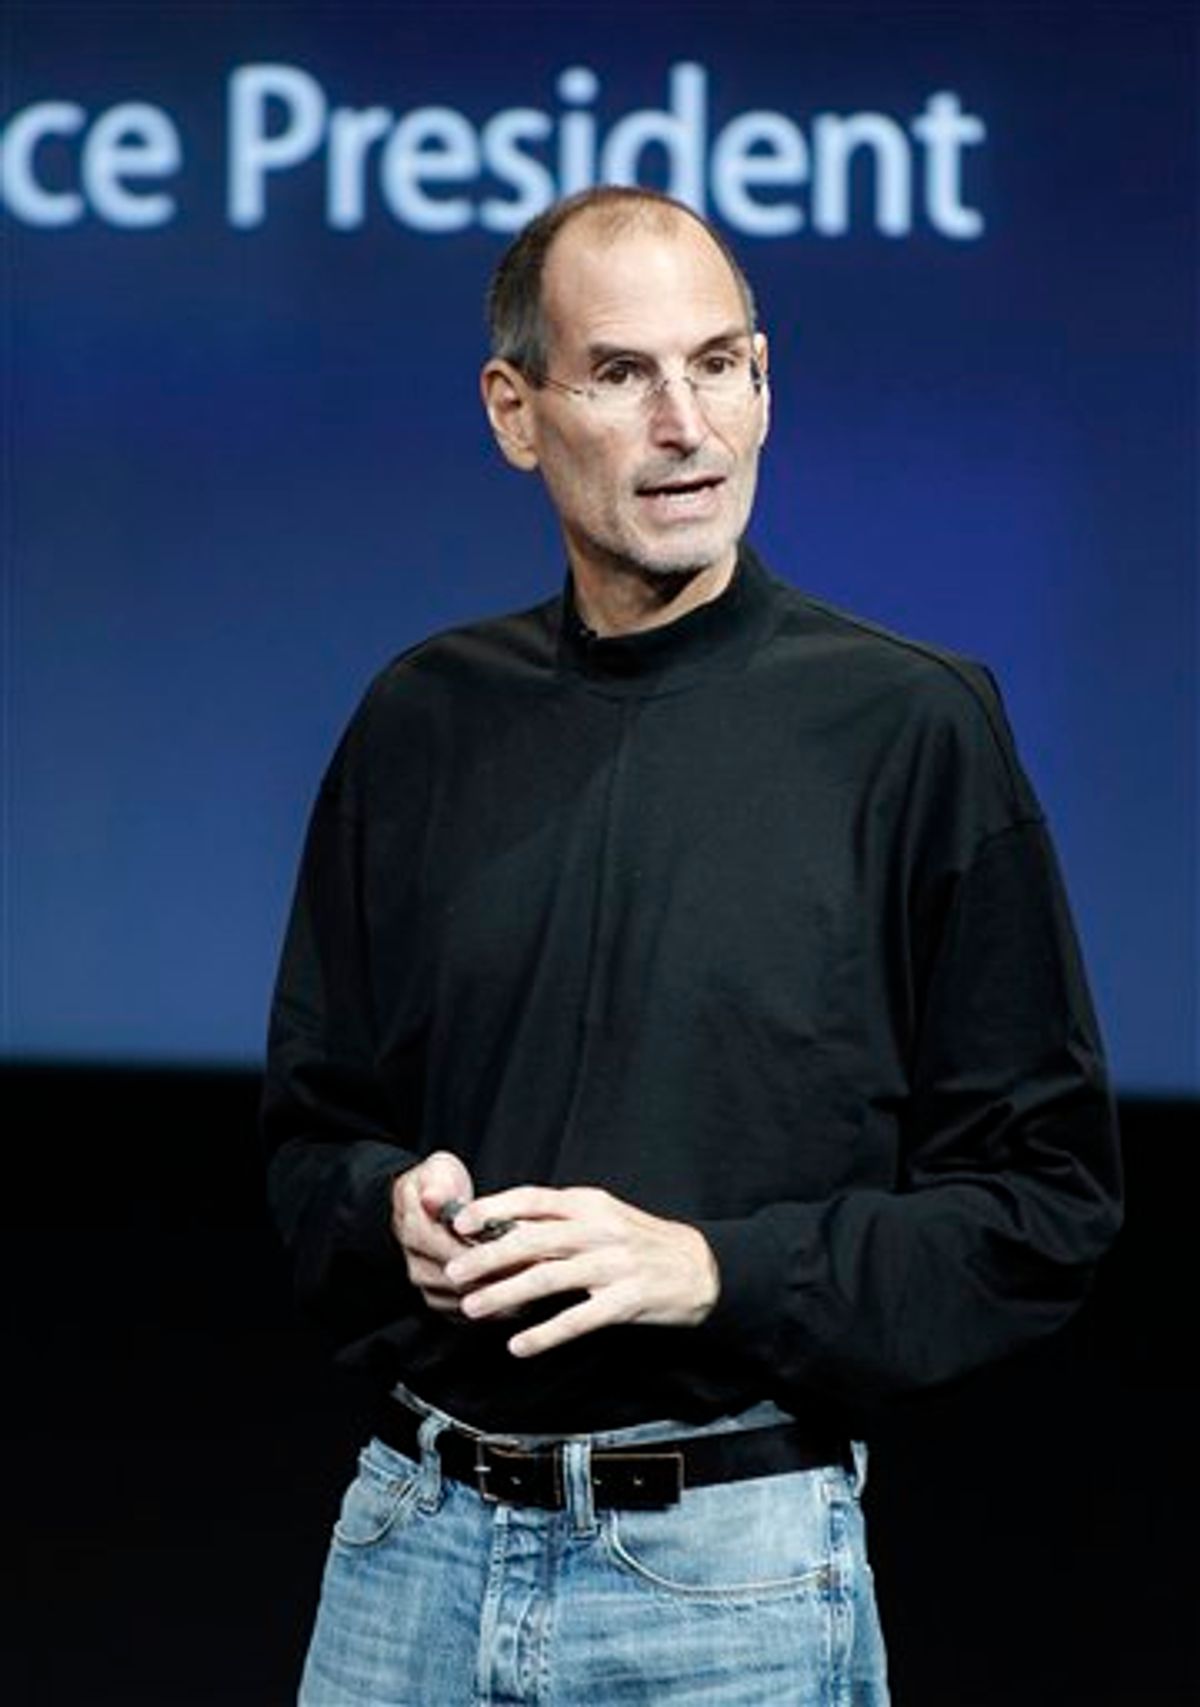 Apple CEO Steve Jobs speaks at an Apple event at Apple headquarters in Cupertino, Calif., Wednesday, Oct. 20, 2010, announcing a new version of iLife, Apple Inc.'s programs for managing photos, editing videos and other tasks. (AP Photo/Tony Avelar) (AP)